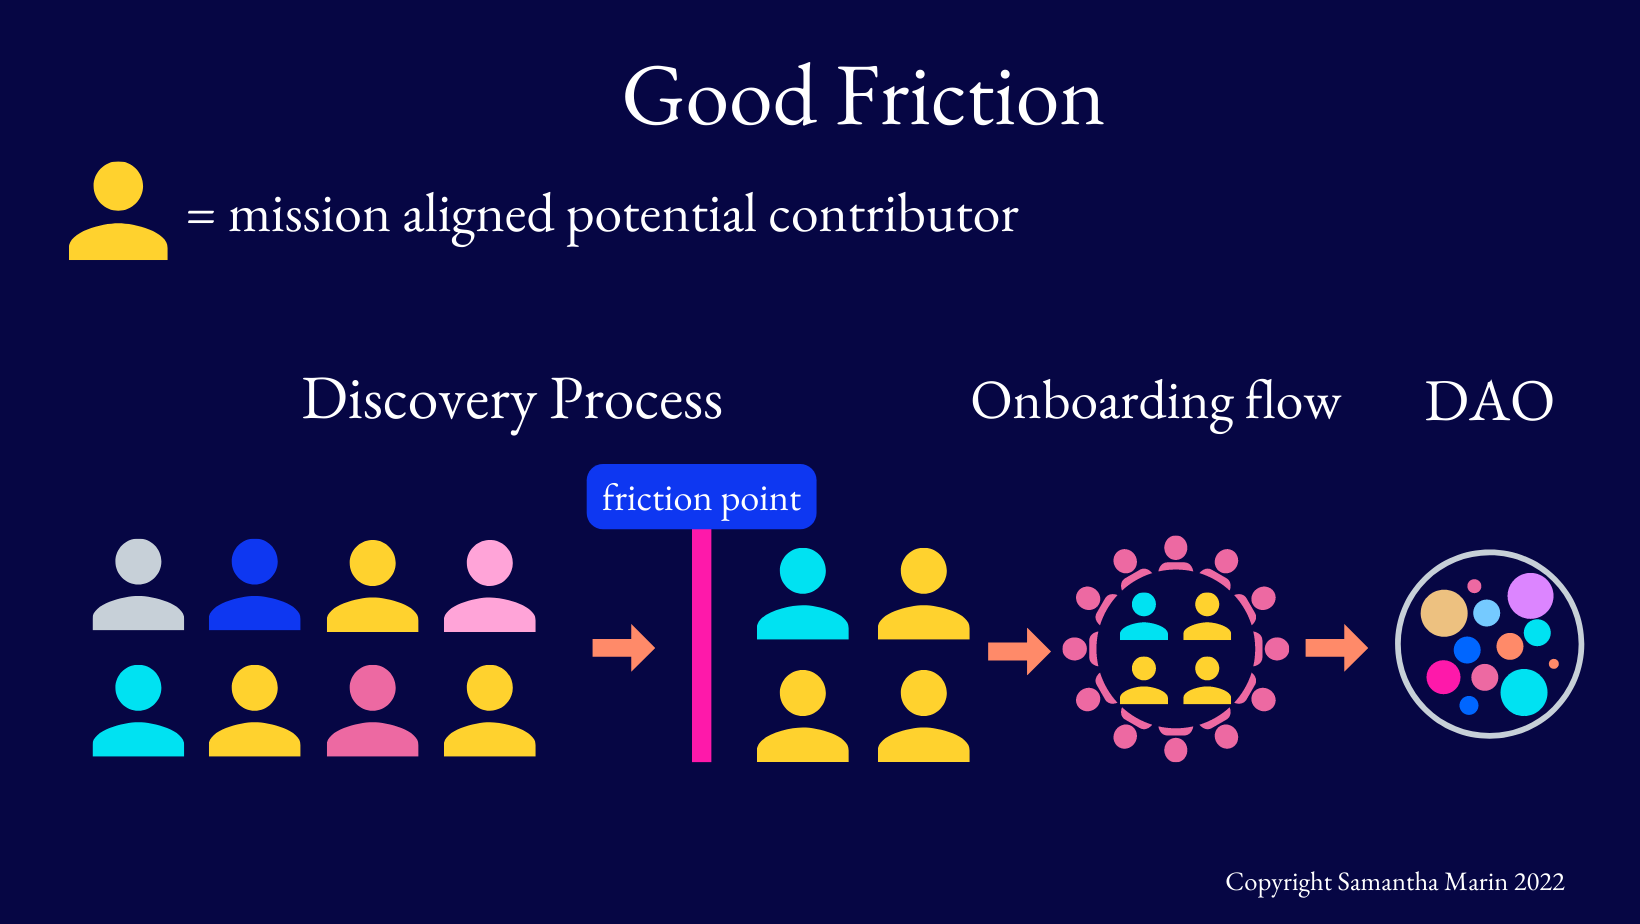 Good friction filters out some individuals who aren't mission aligned, but allows individuals who choose to work through the friction point to enter. These potential contributors could become mission aligned or may choose to leave during the onboarding flow.